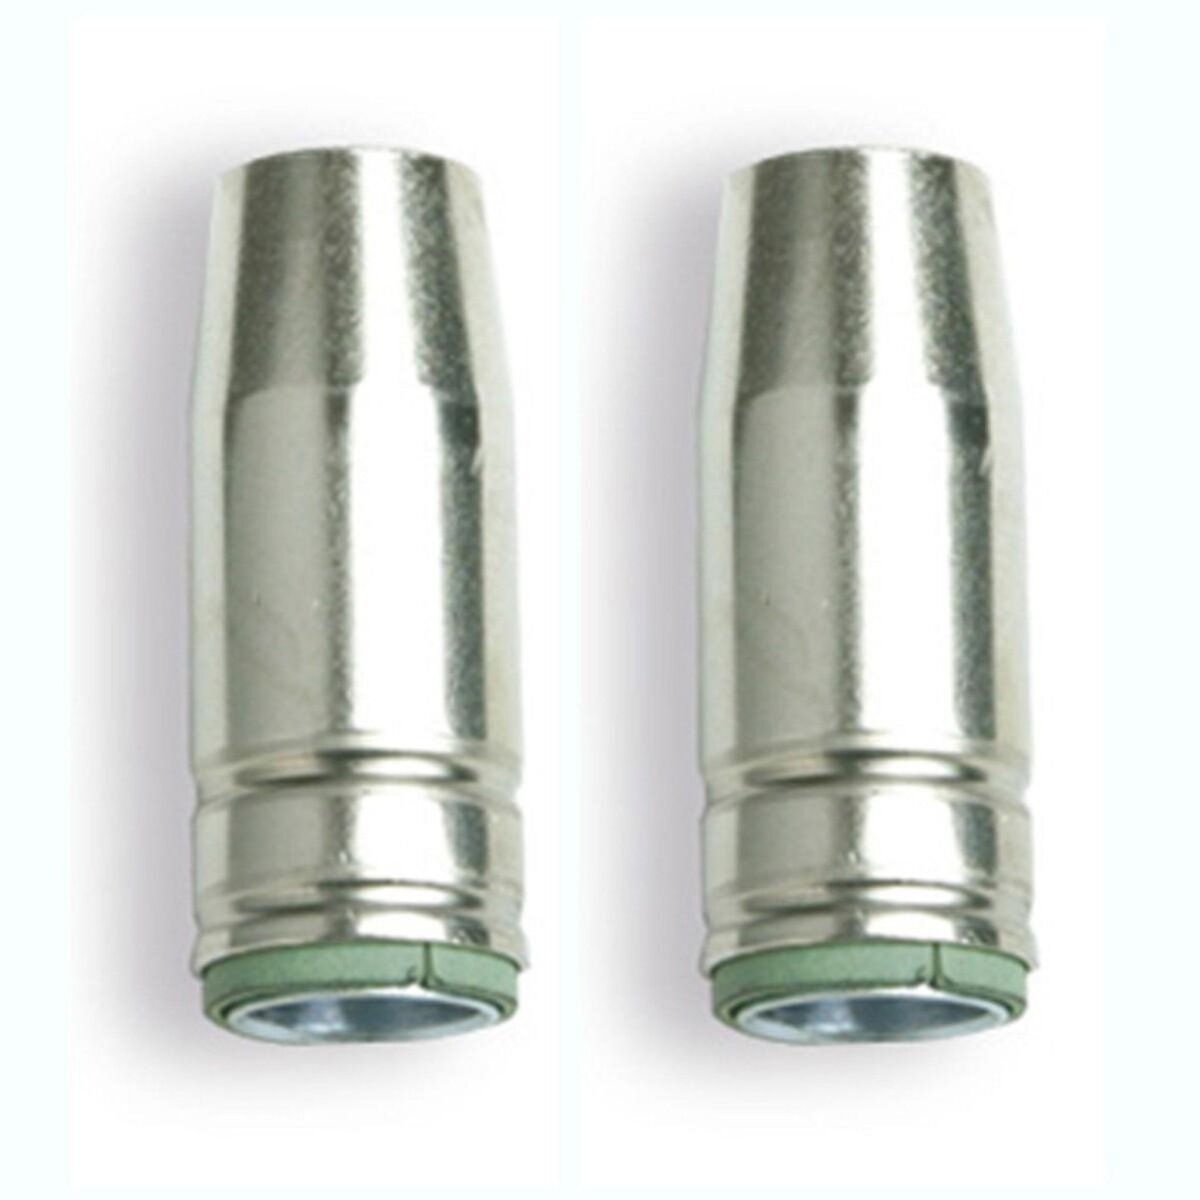 Awelco Lot de 2 Buses Coniques pour Torches MIG Standard 12 x 54 mm - Ø 13 mm AWELCO